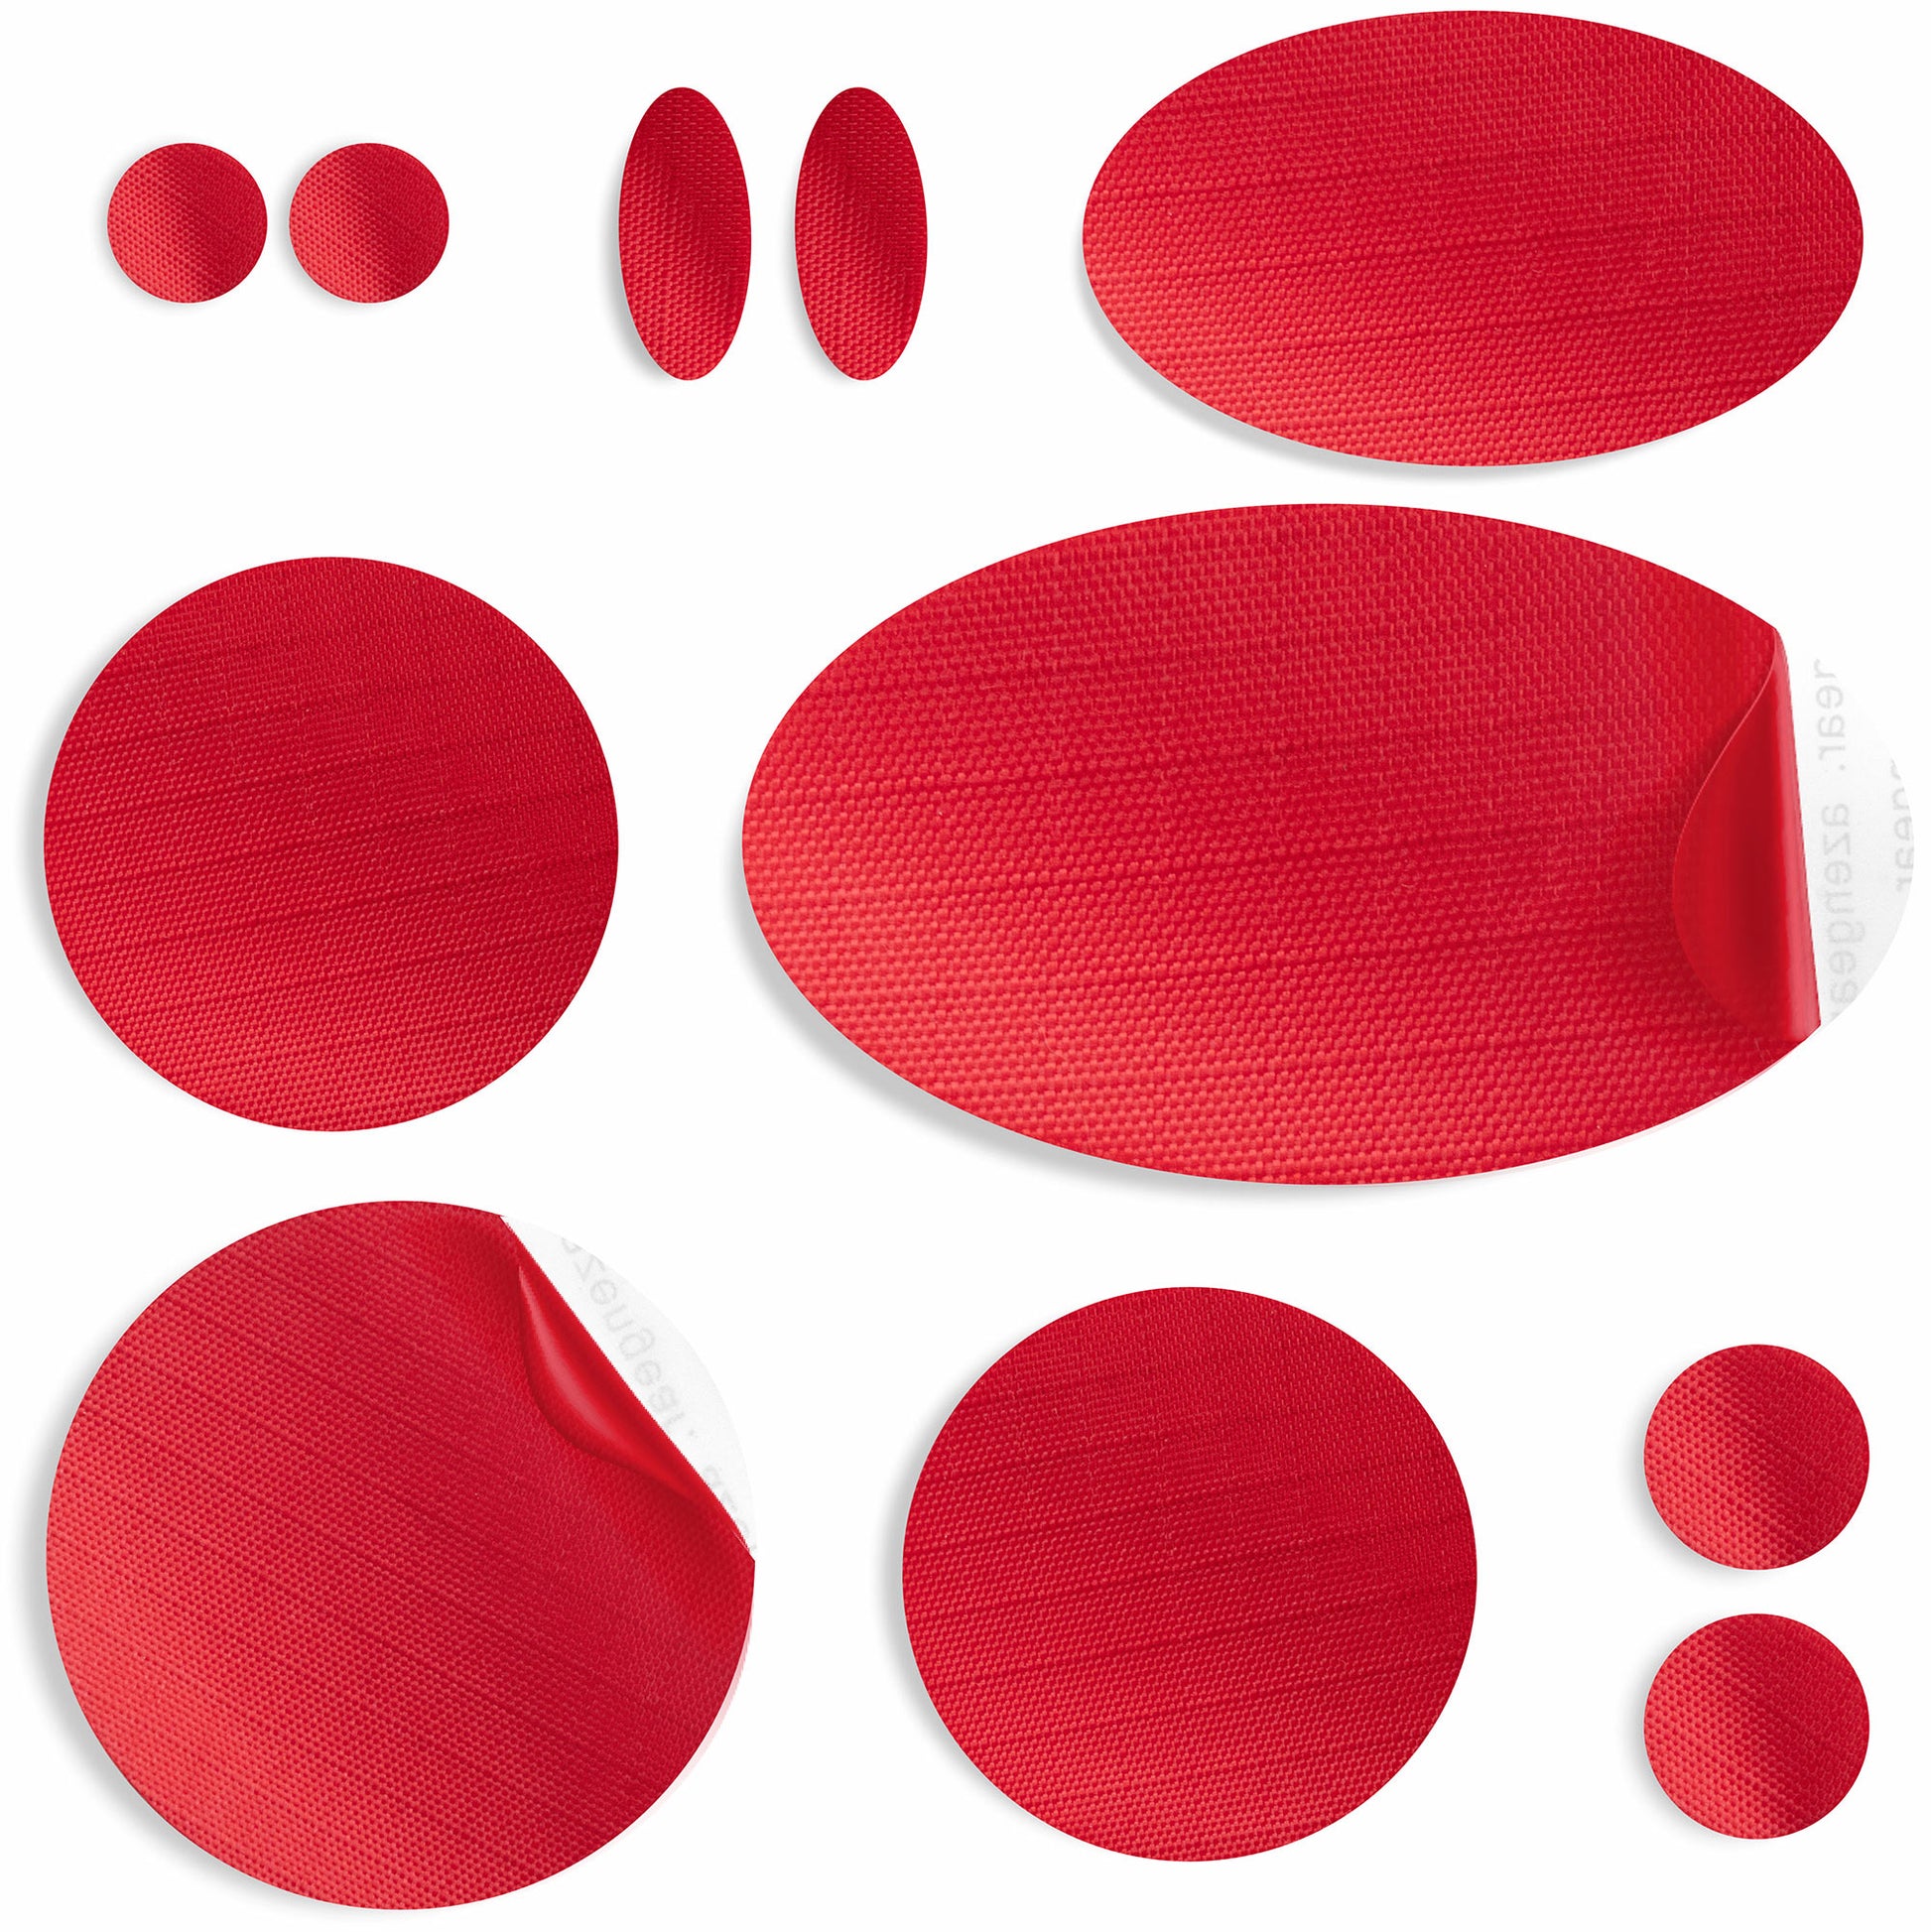 Red Puffer Jacket Repair Patches | Waterproof, Pre-Cut, Self-Adhesive, Tear-Resistant (11 Pieces)